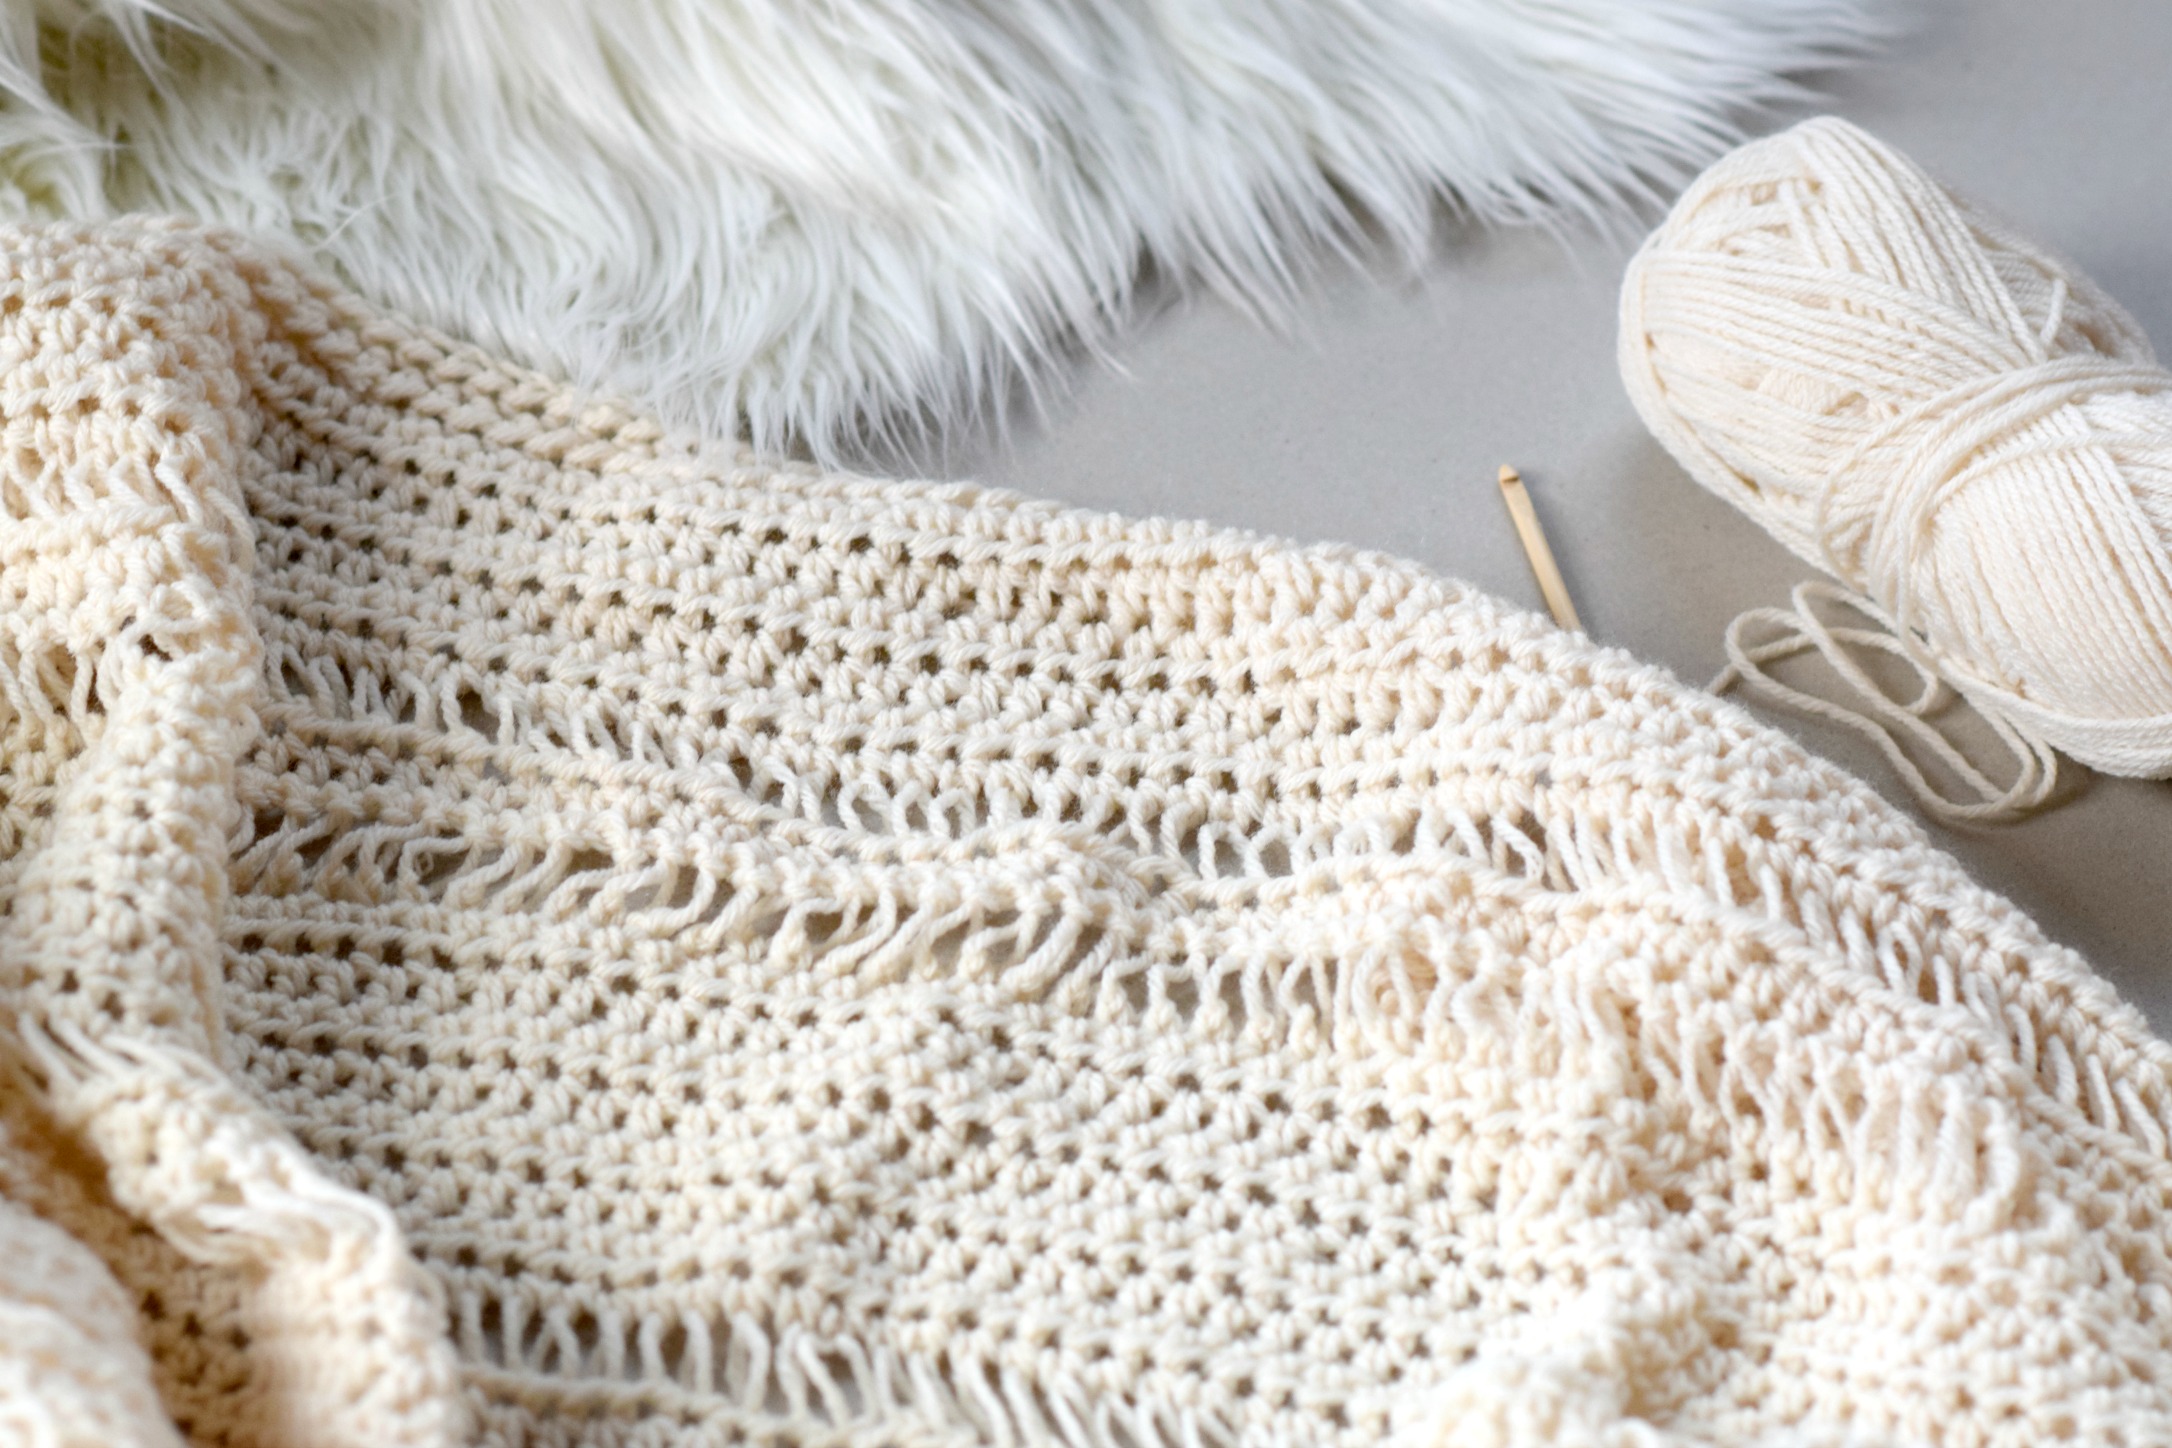 How To Crochet the Drop Stitch